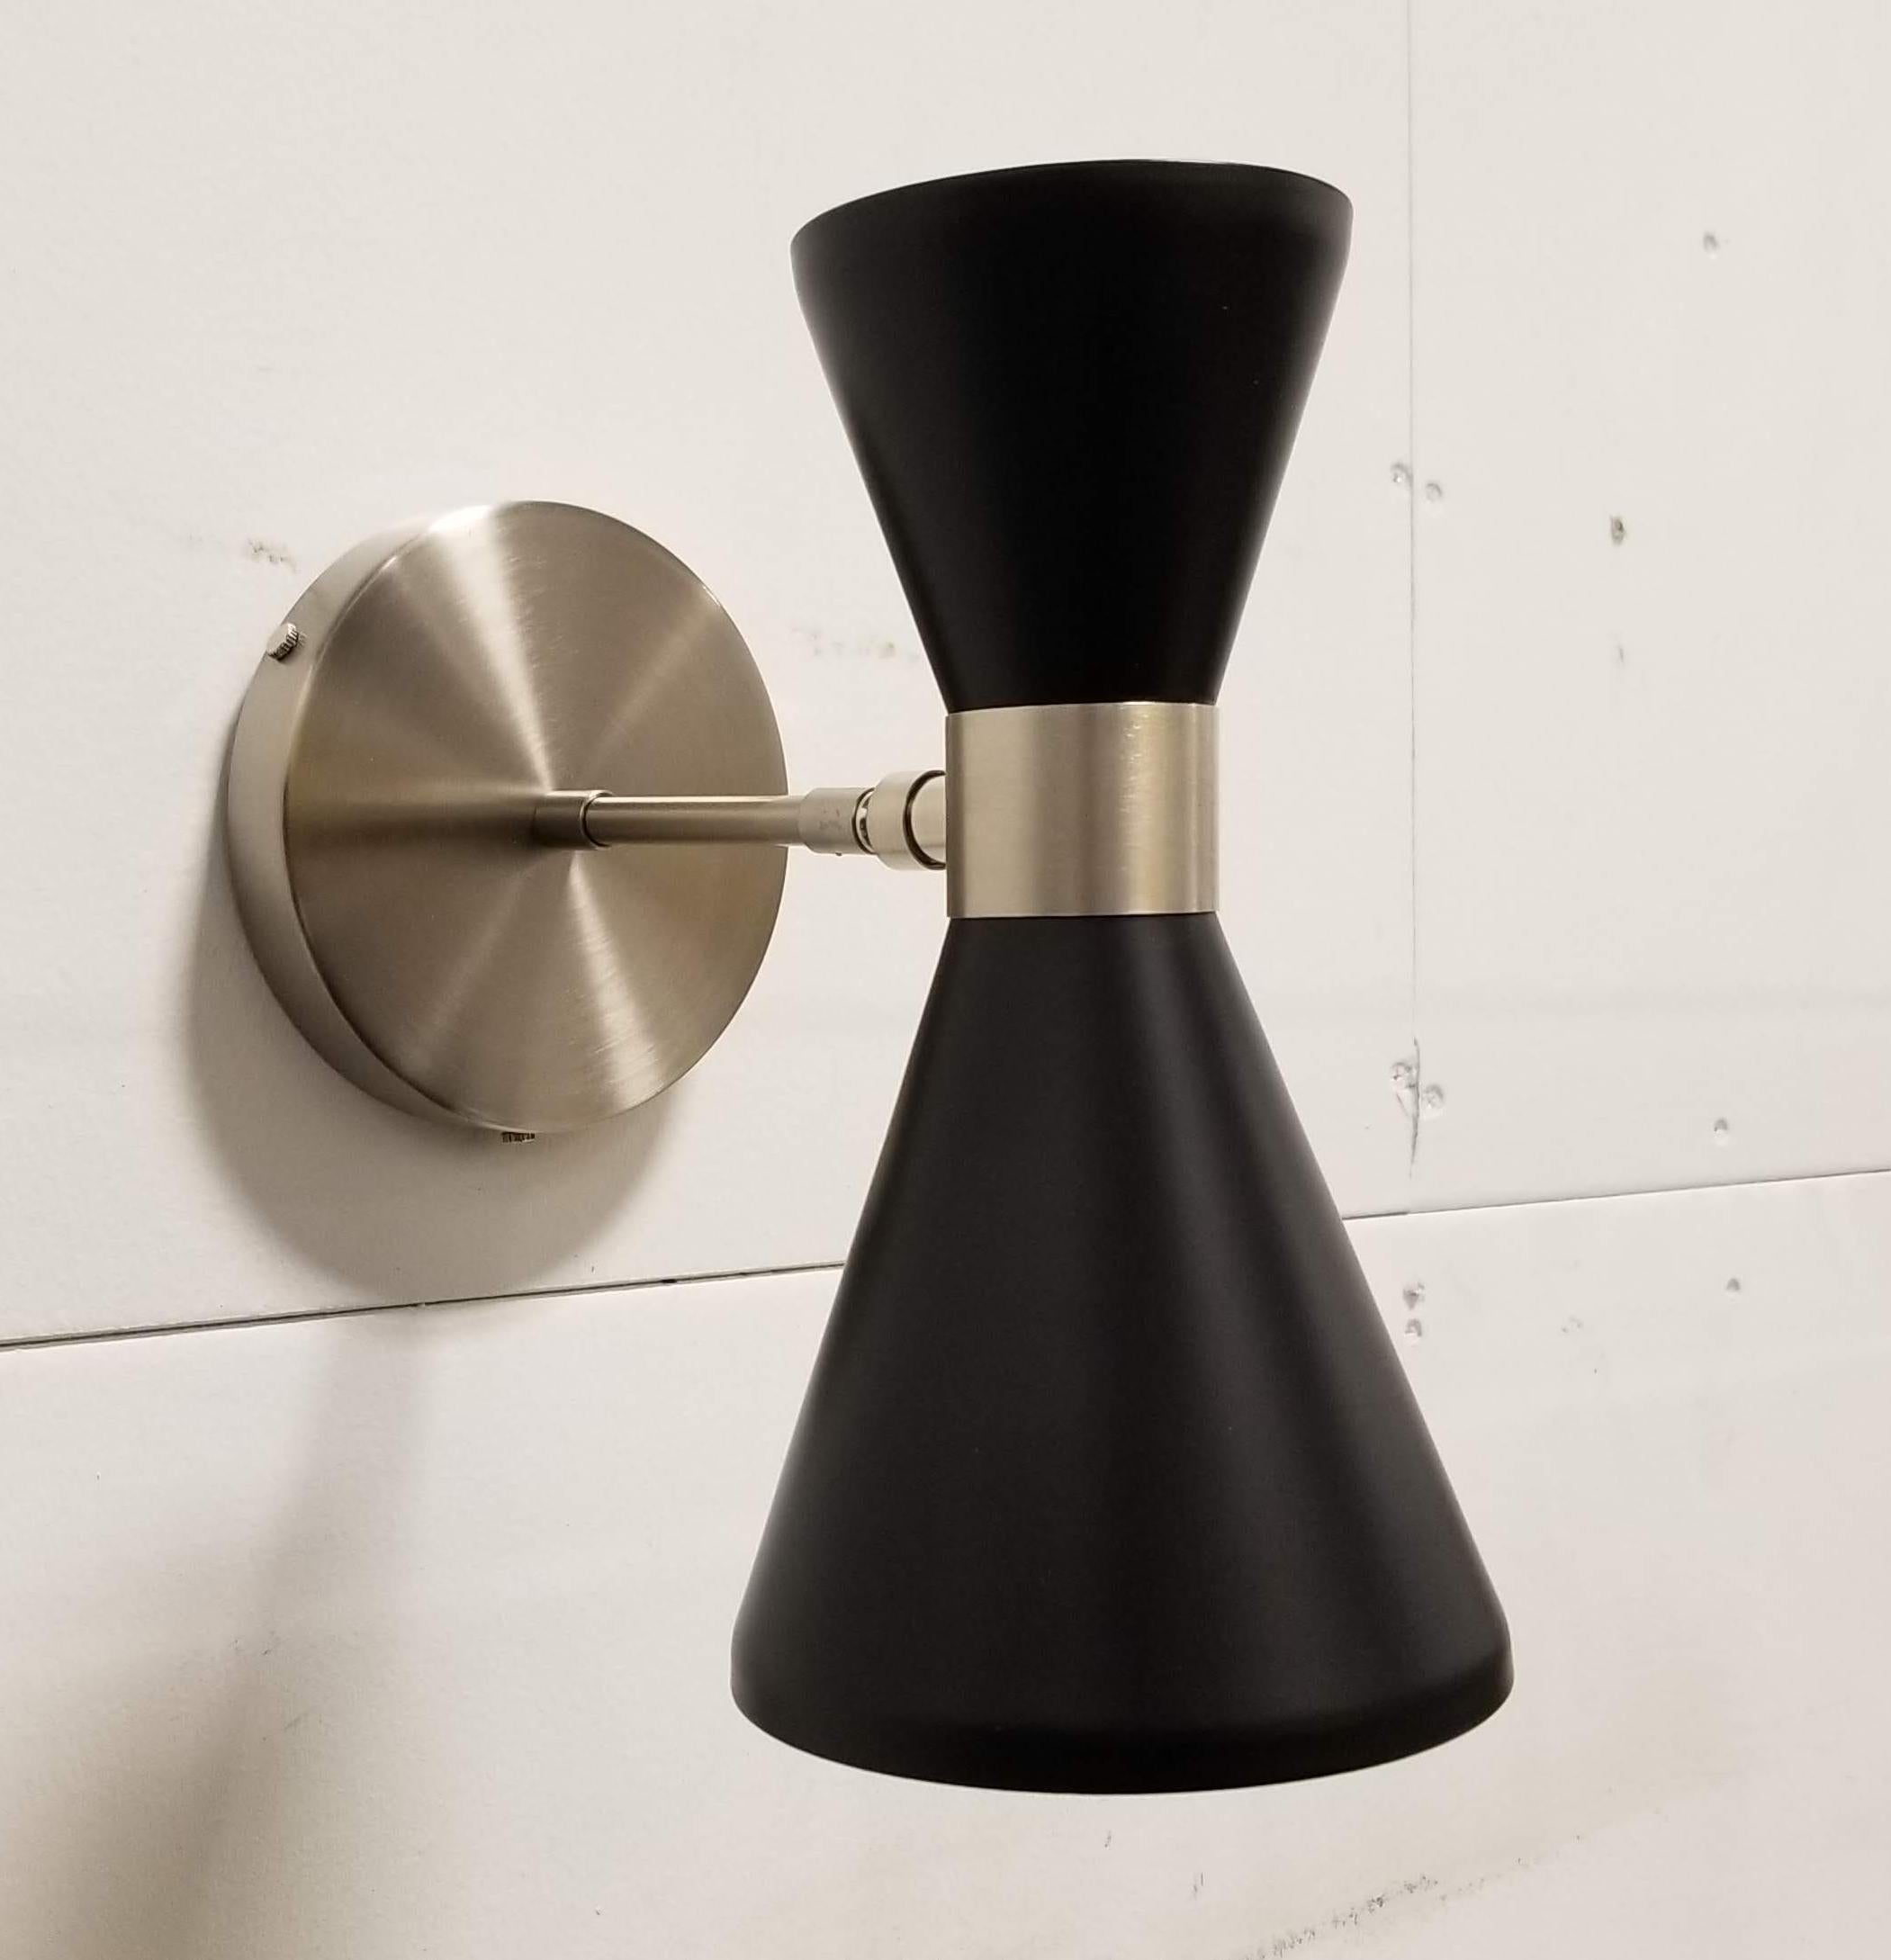 The Campana wall sconce or reading light shown in brushed nickel and matte black enamel fabricated in NYC by Blueprint Lighting, 2018. The wide band and distinctly bevelled edge makes the Campana a strong design statement. Swiveling head allows for